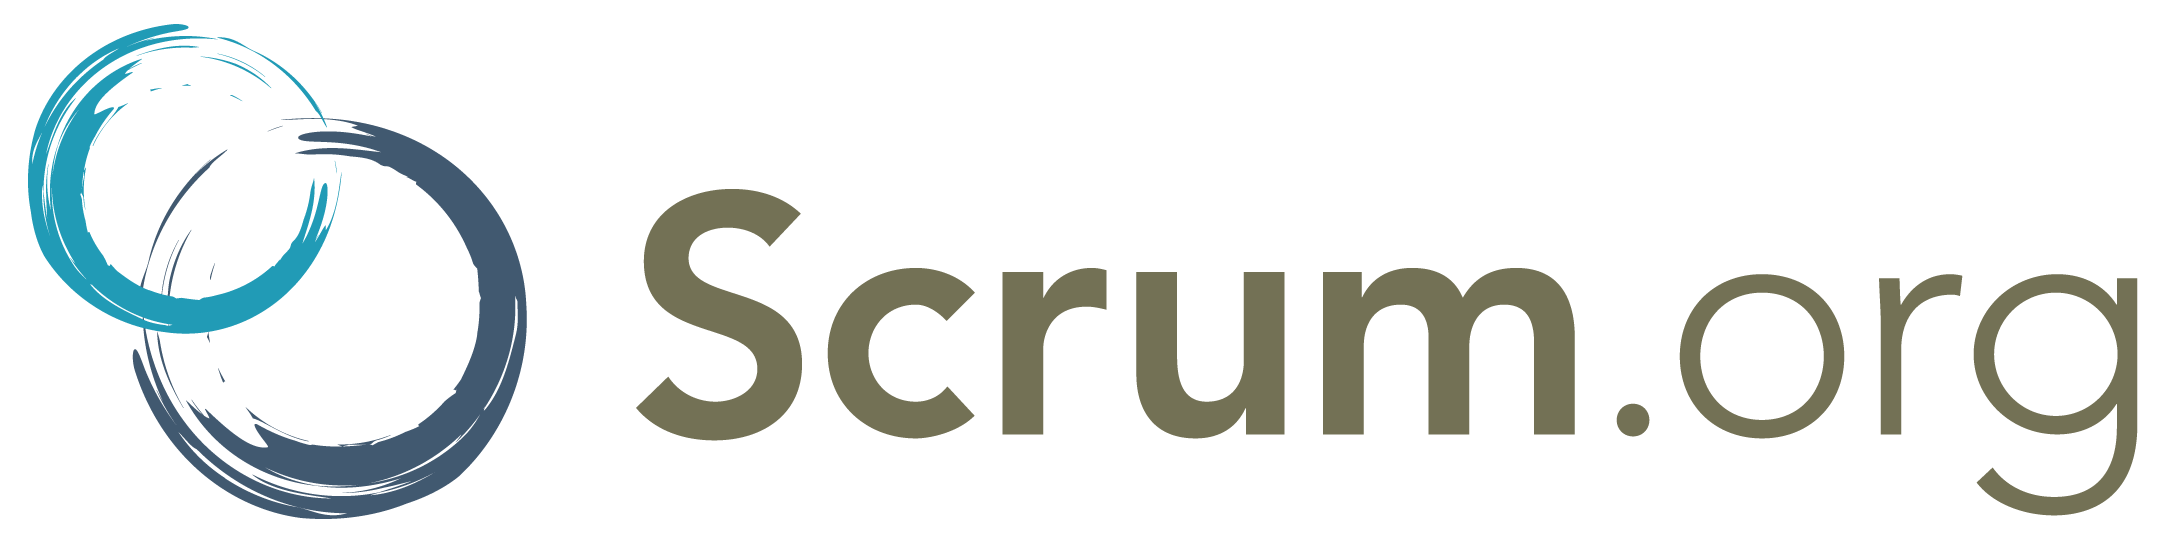 _images/scrumlogo.png